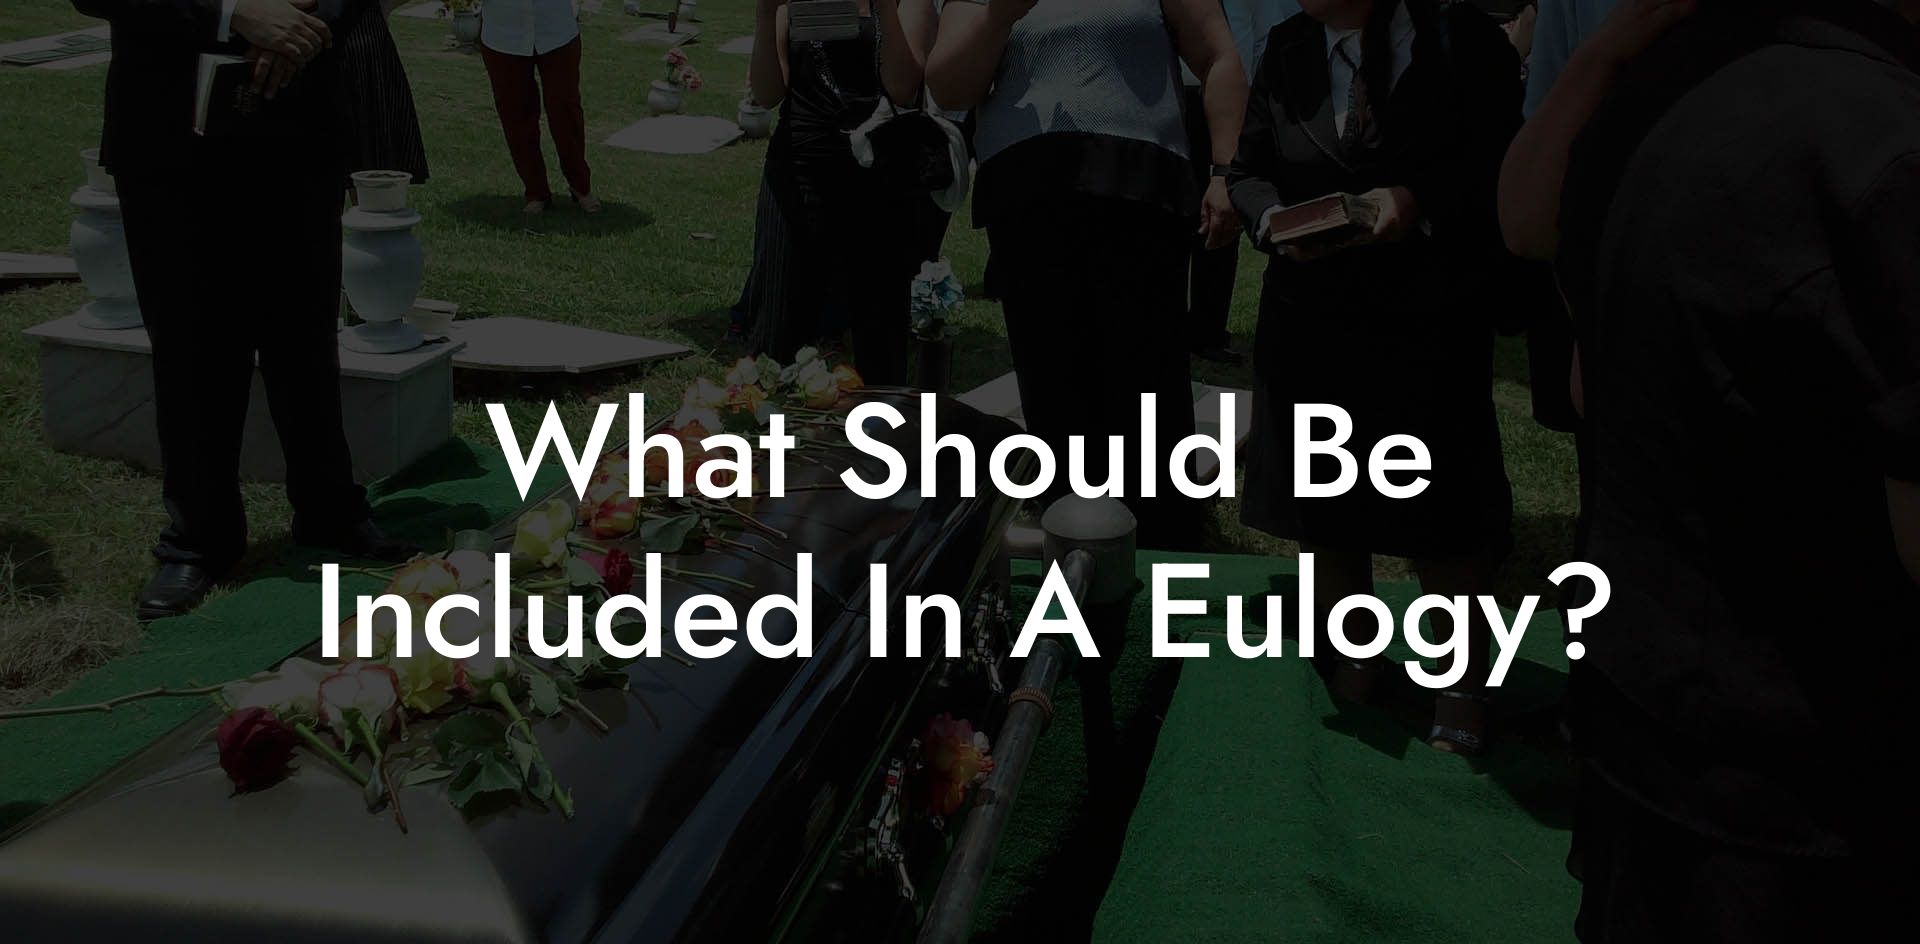 What Should Be Included In A Eulogy